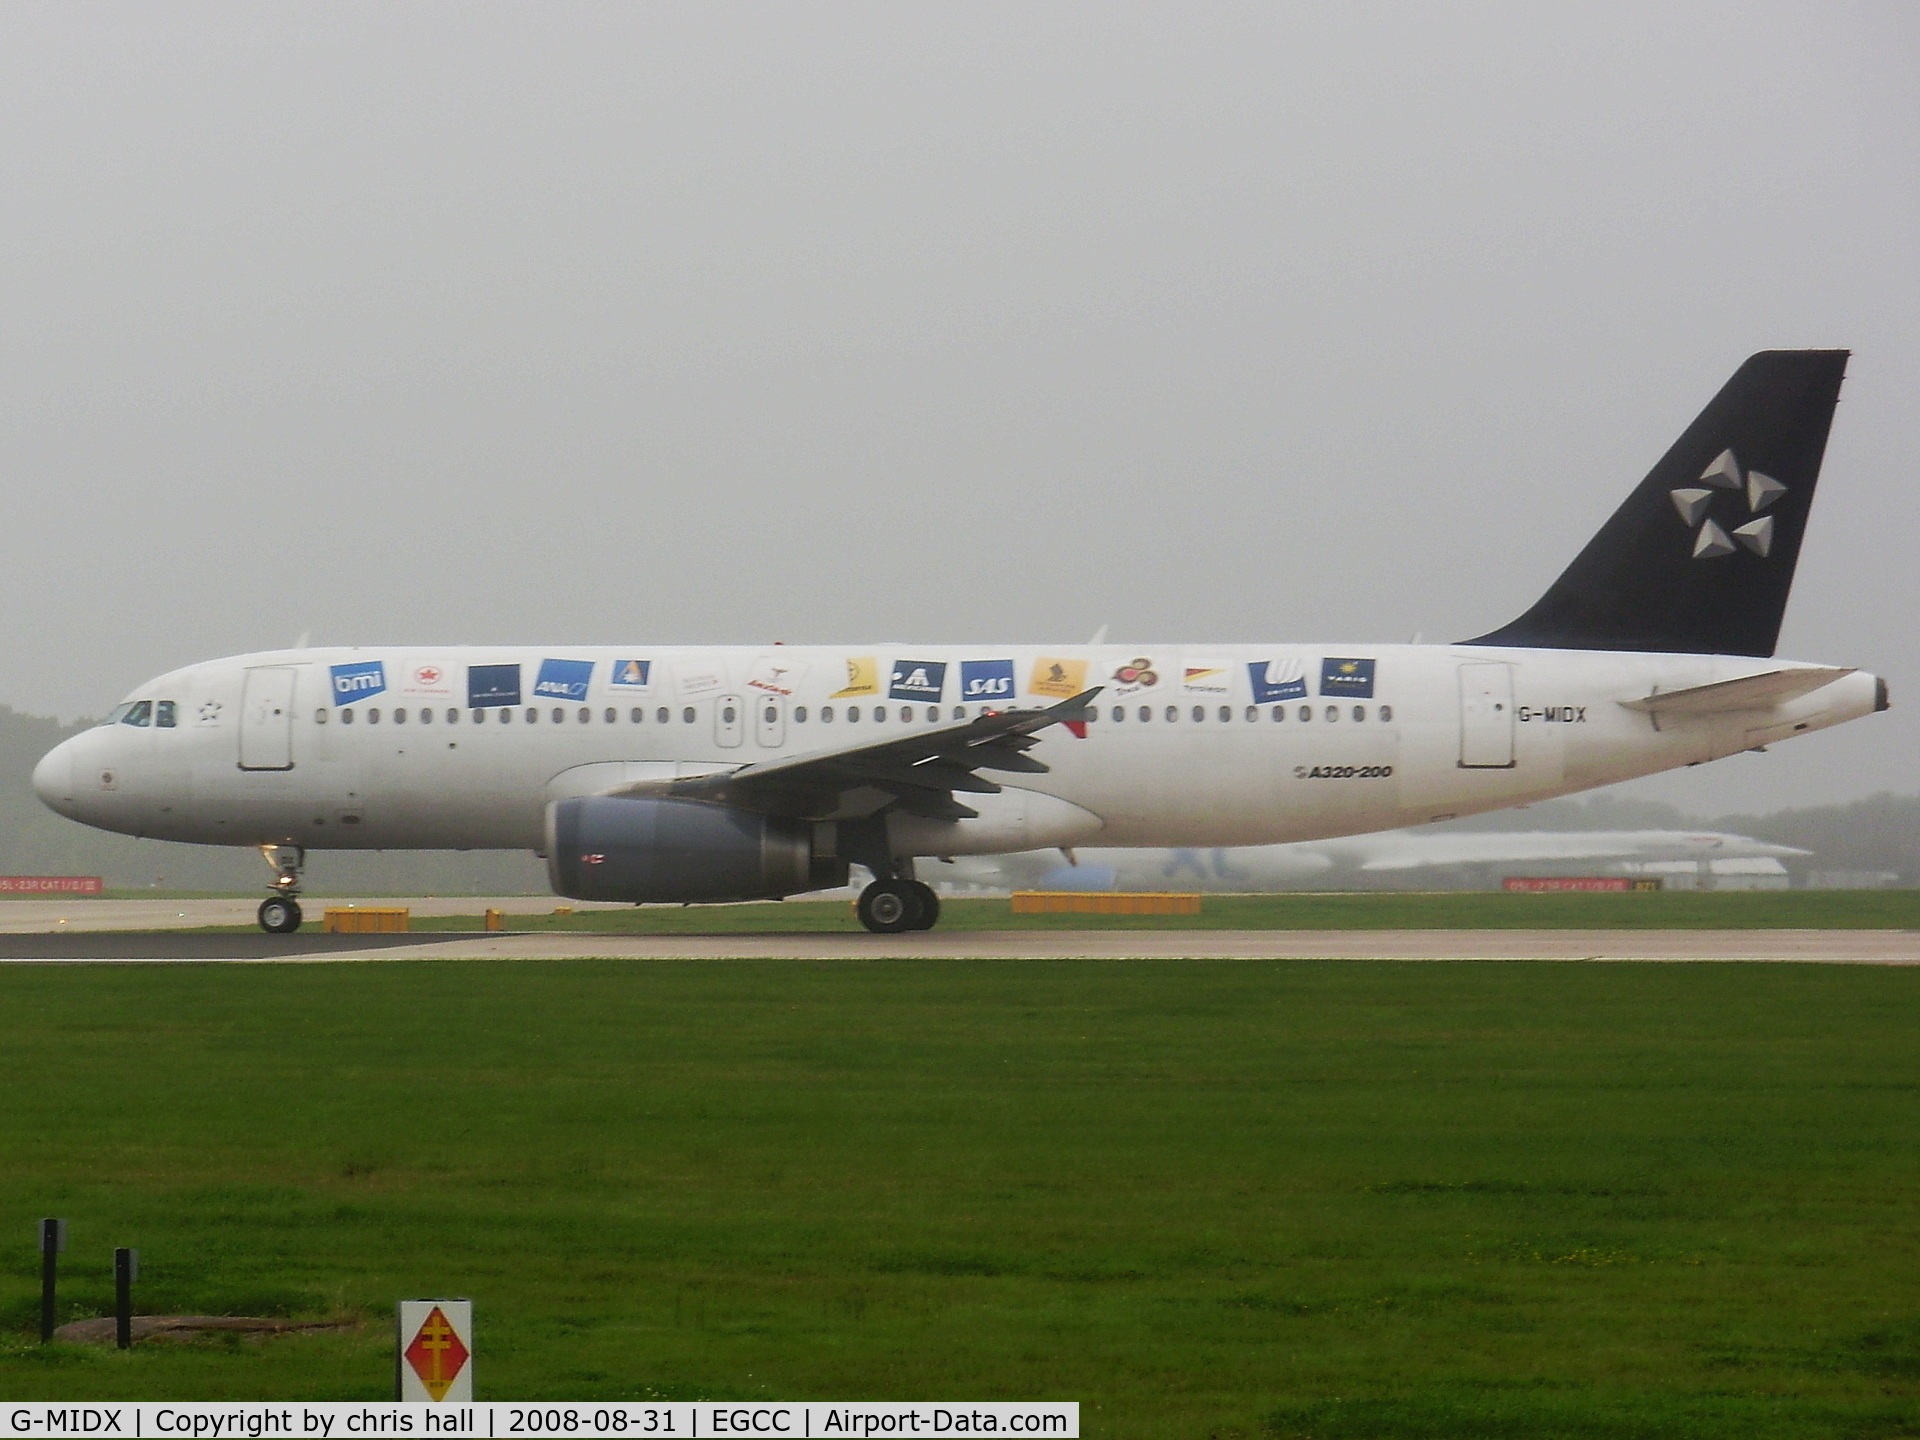 G-MIDX, 2000 Airbus A320-232 C/N 1177, BMI, in Star Alliance livery